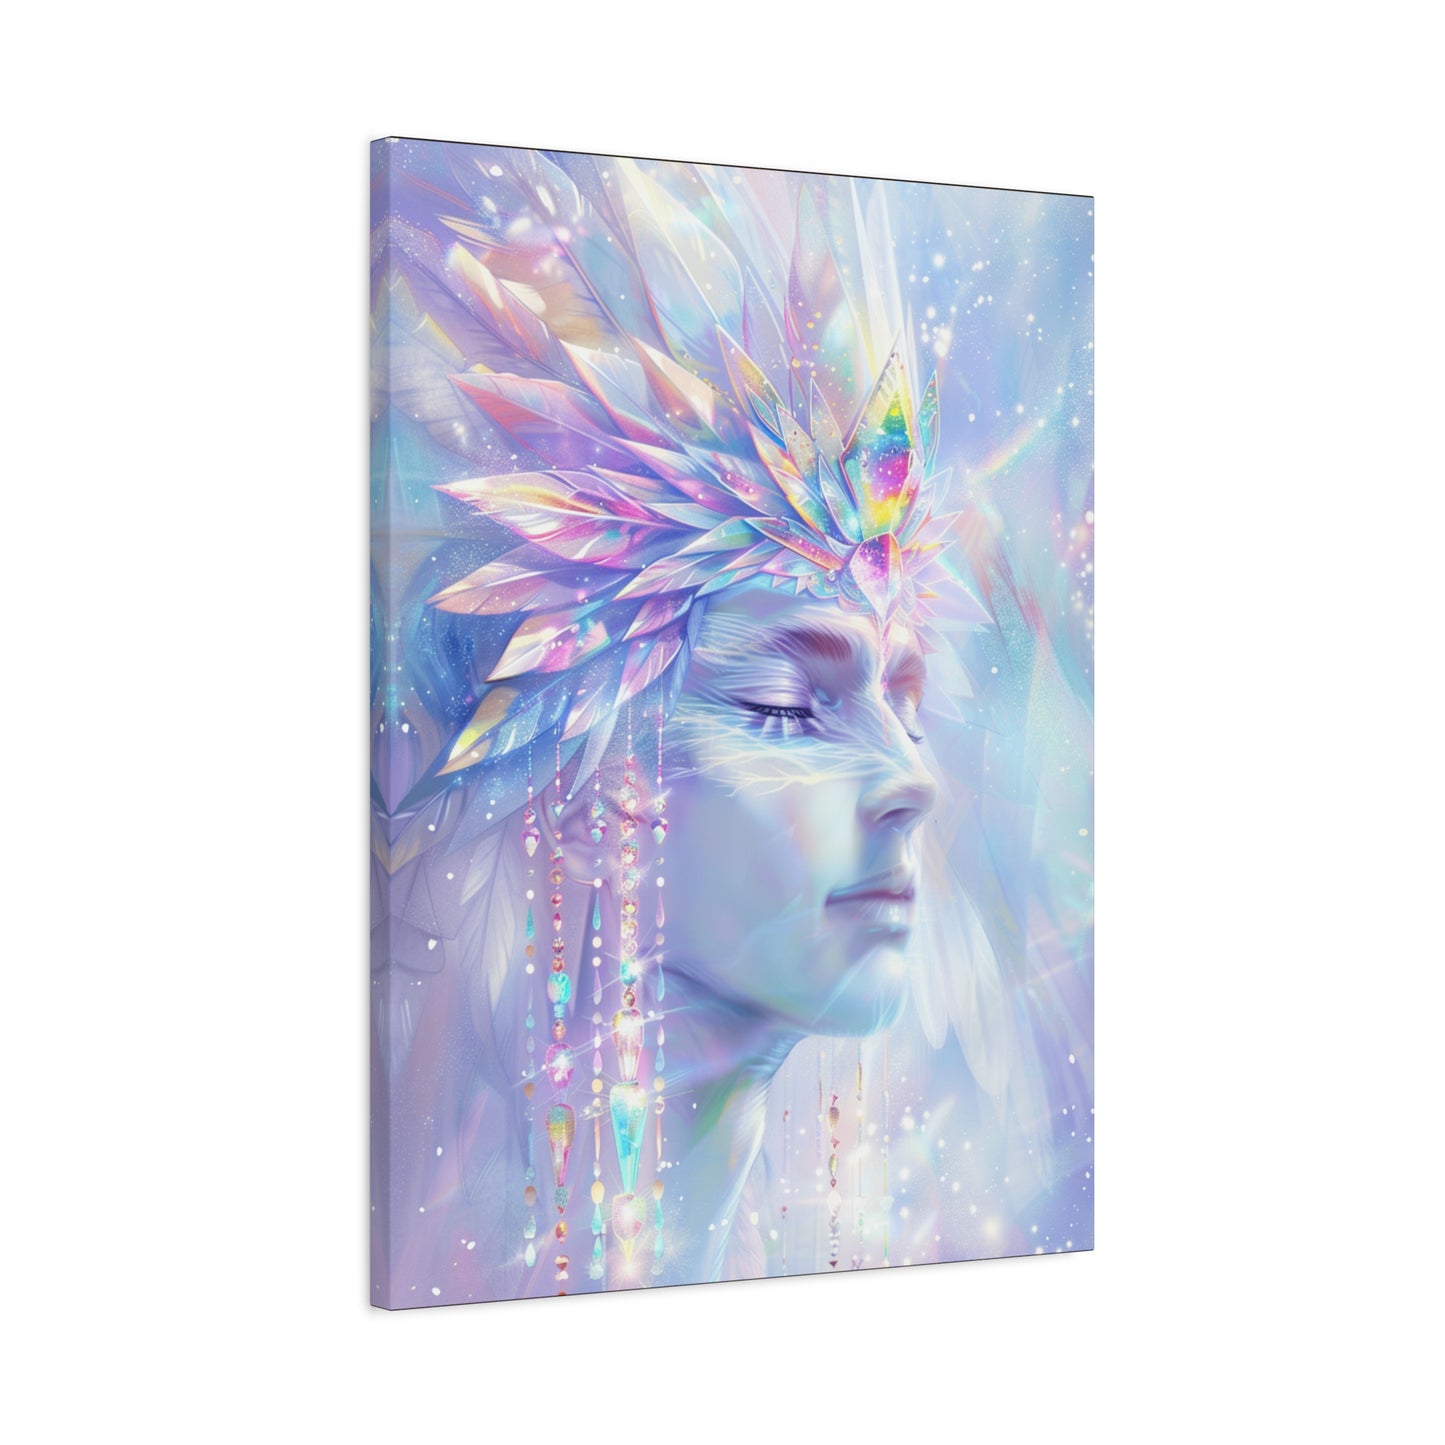 Crystalline being from Aurora - Vibrant home decor